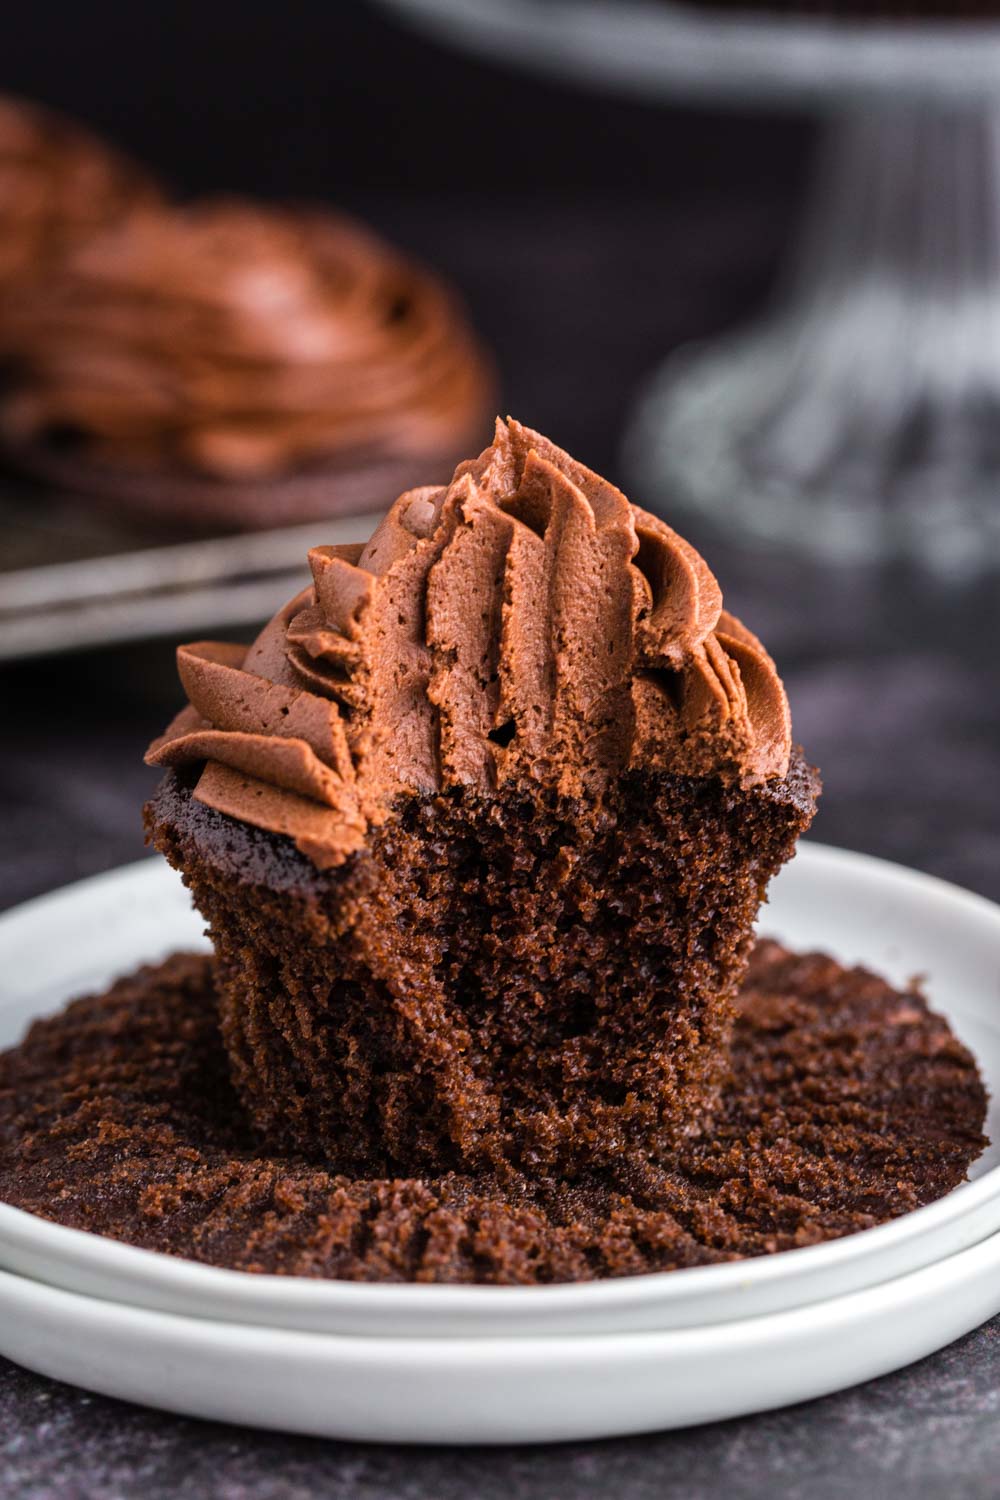 half eaten chocolate cupcake with chocolate buttercream frosting, unwrapped cupcake liner, on top of stacked white side plates with frosted cupcakes in a tin pan in background